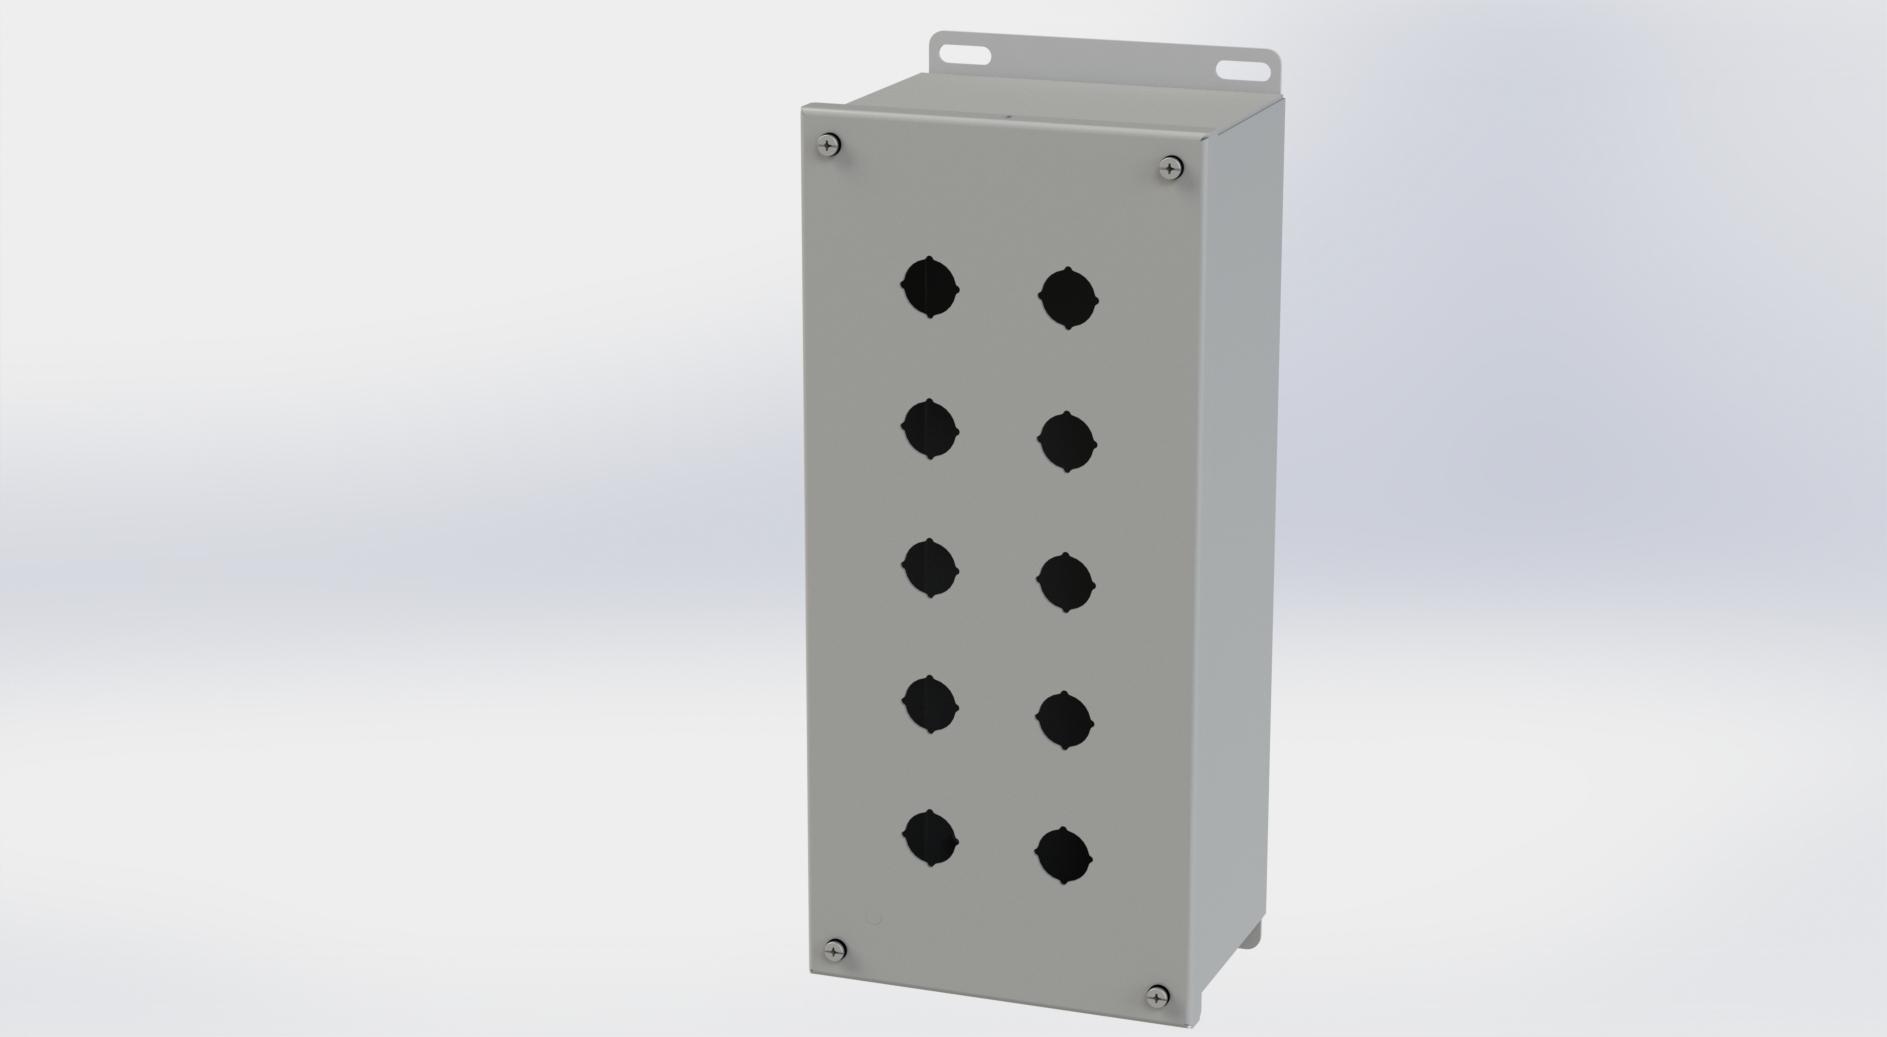 Saginaw Control SCE-10PBXI PBXI Enclosure, Height:14.00", Width:6.25", Depth:4.75", ANSI-61 gray powder coating inside and out.